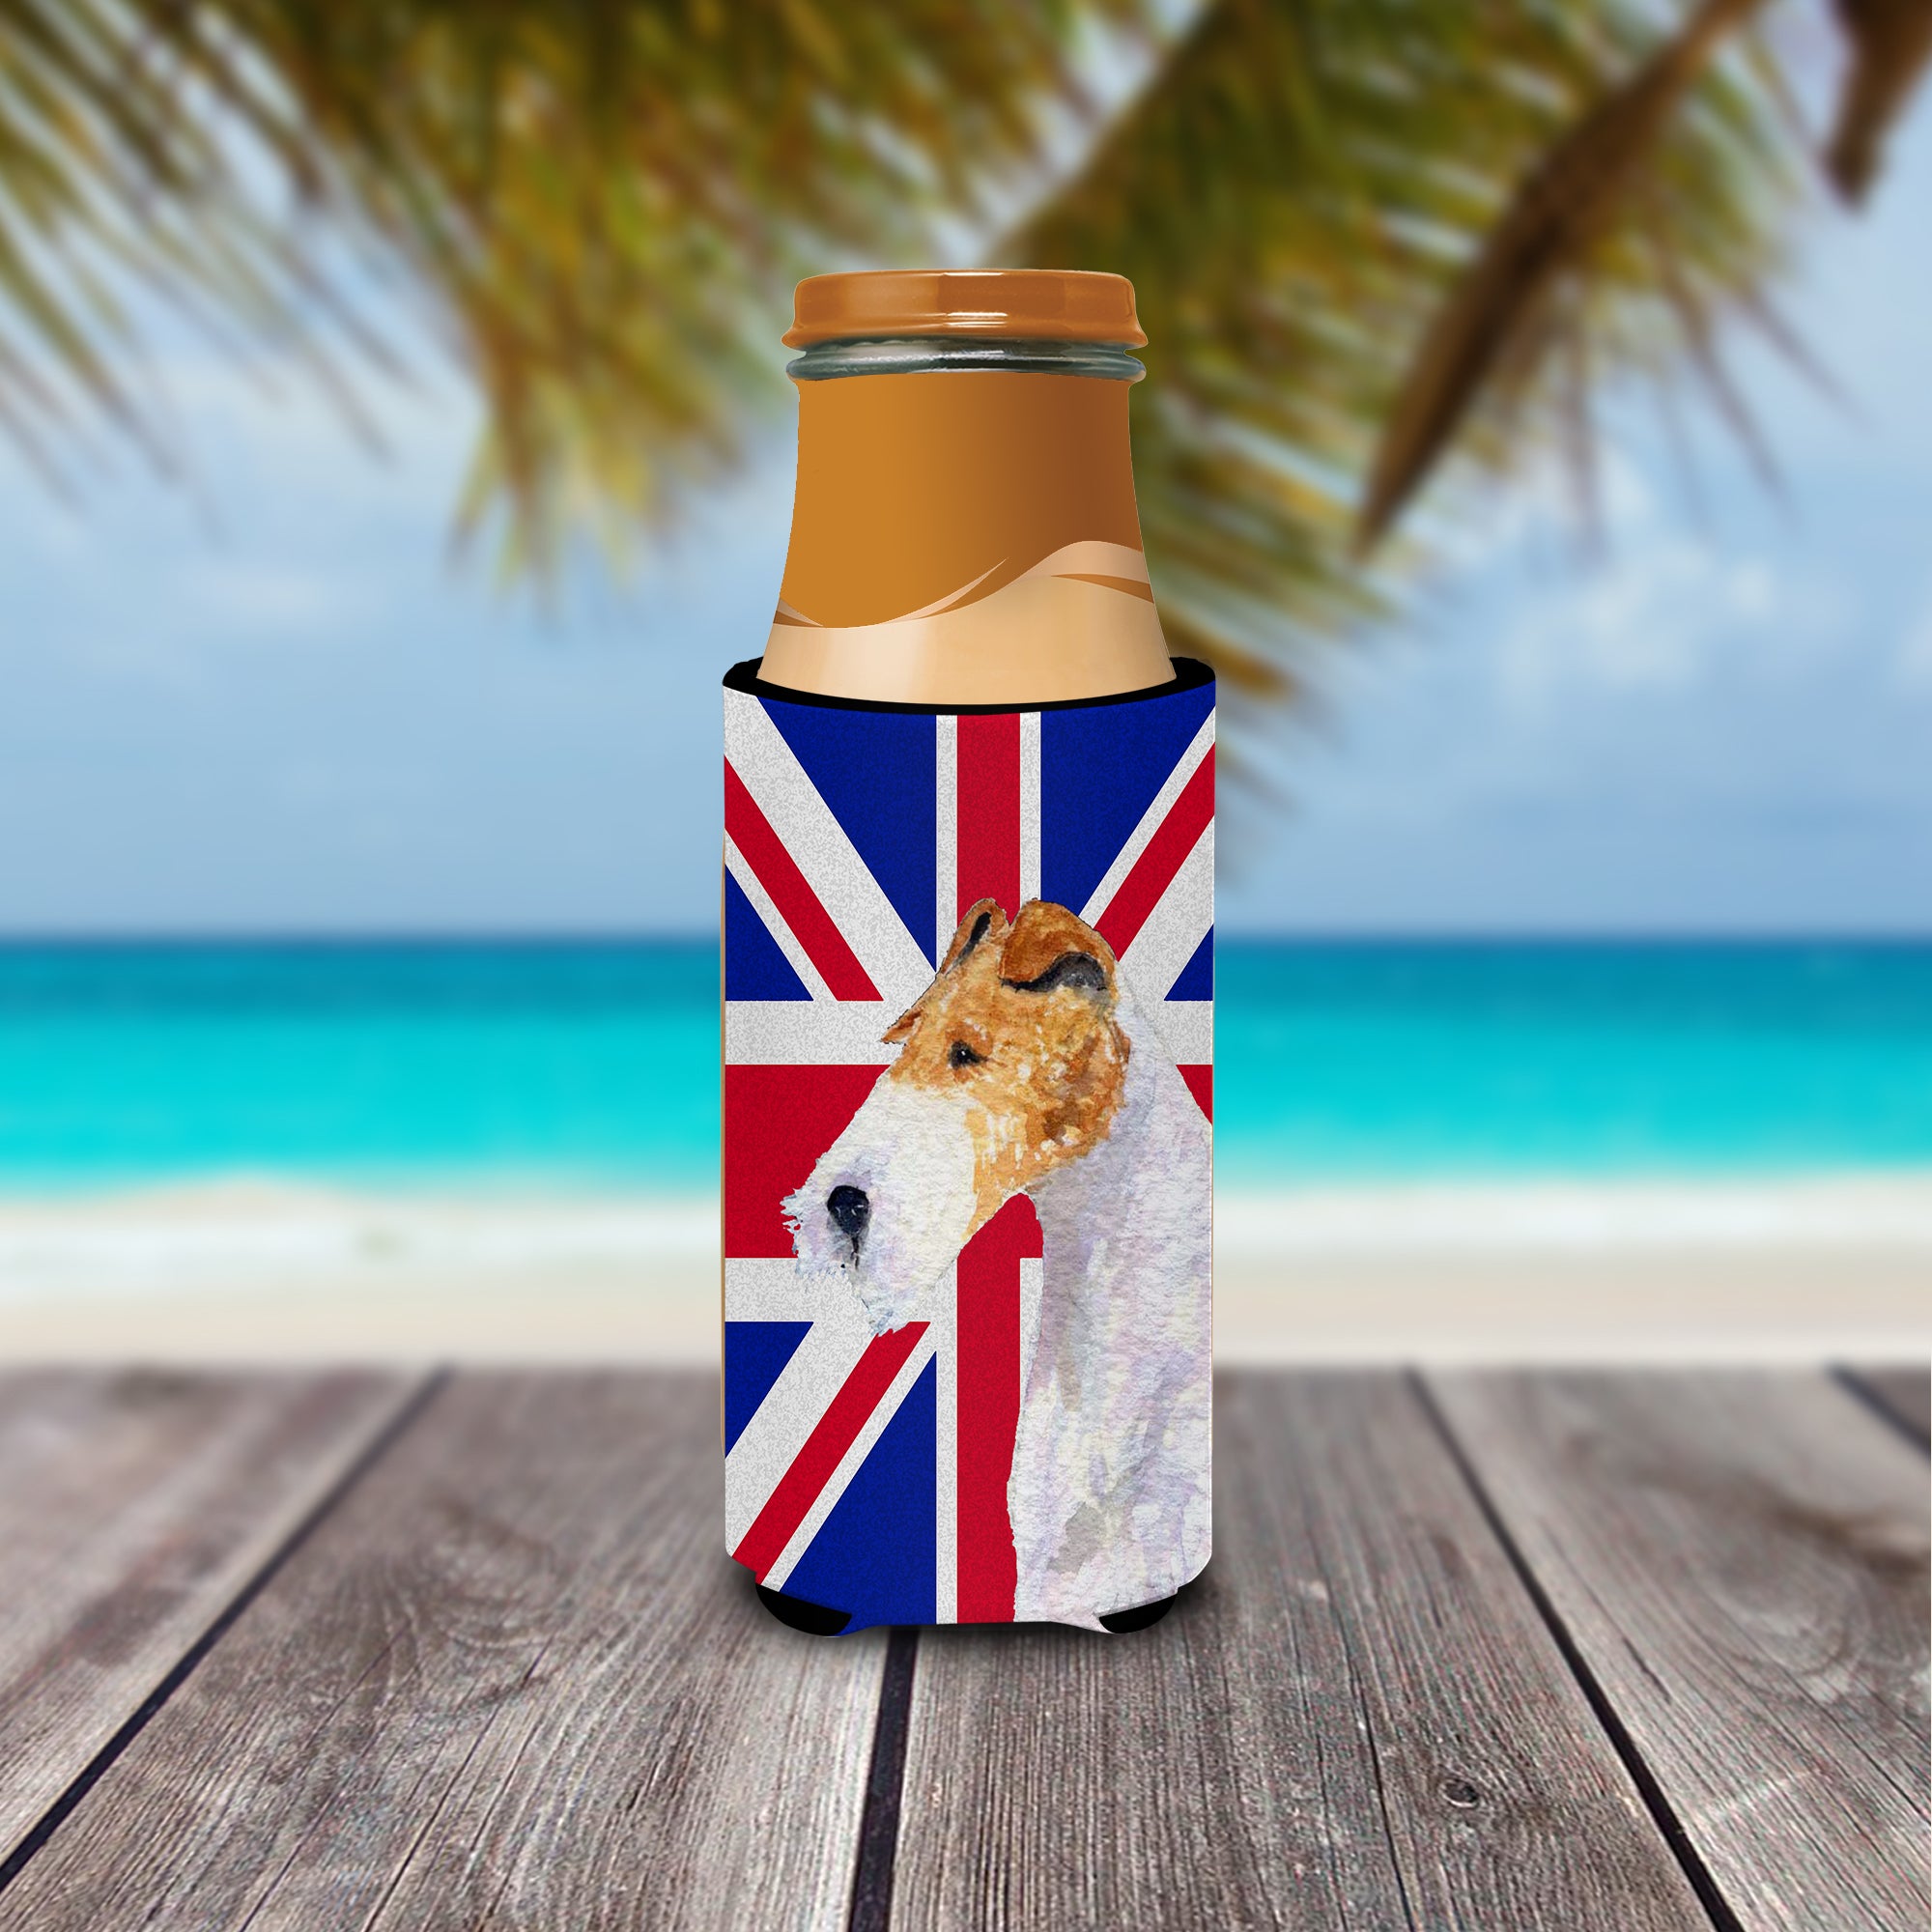 Fox Terrier with English Union Jack British Flag Ultra Beverage Insulators for slim cans SS4920MUK.